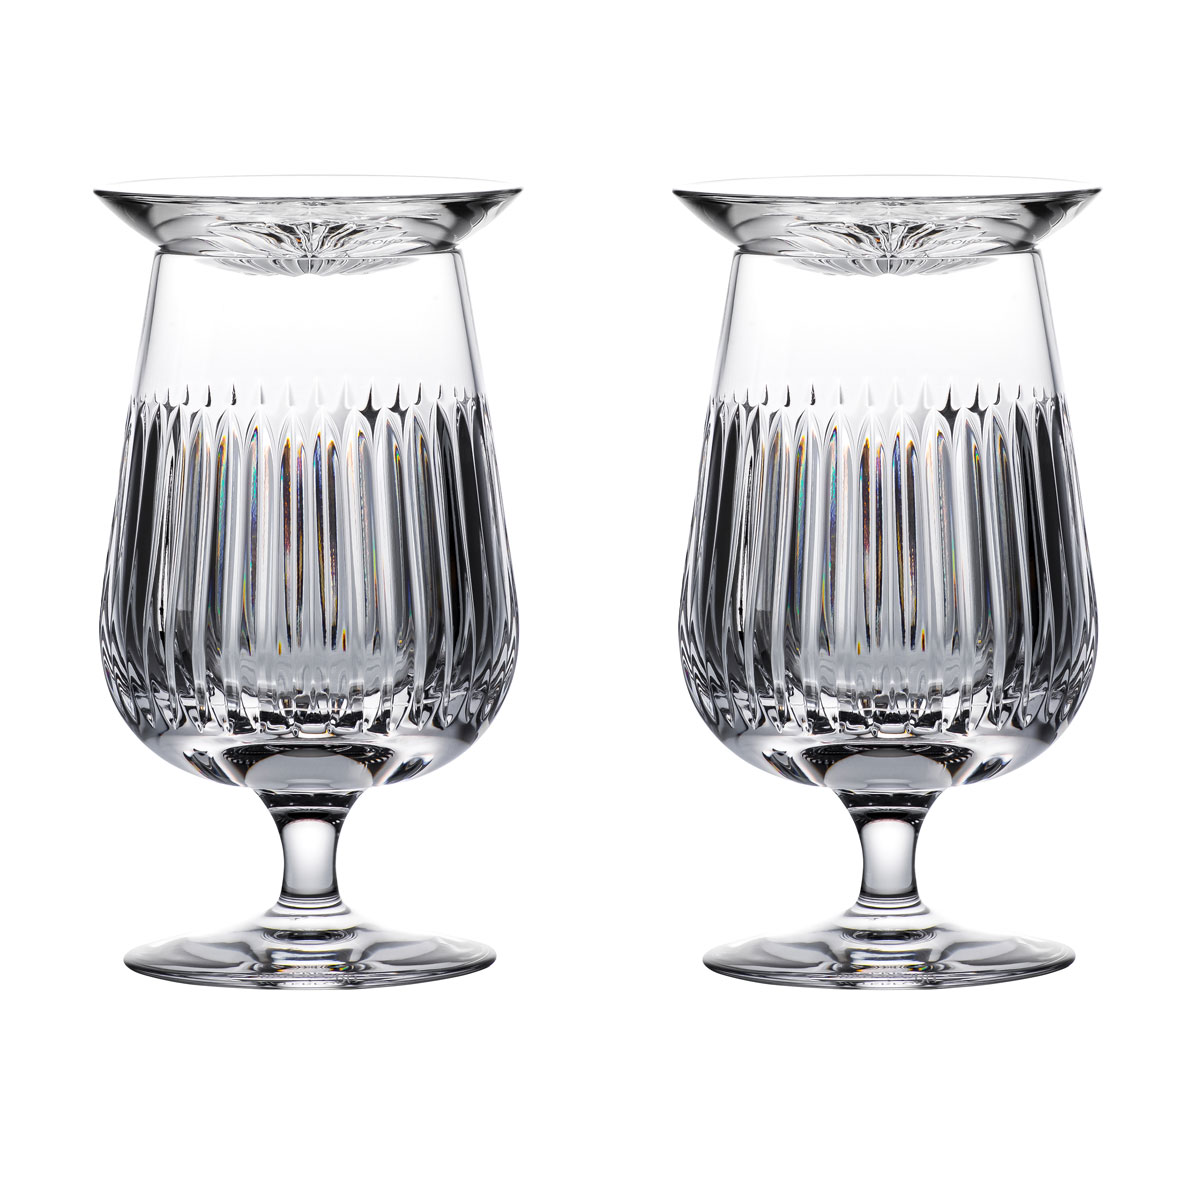 Waterford Crystal Connoisseur Aras Rum Snifters and Tasting Cap, Pair